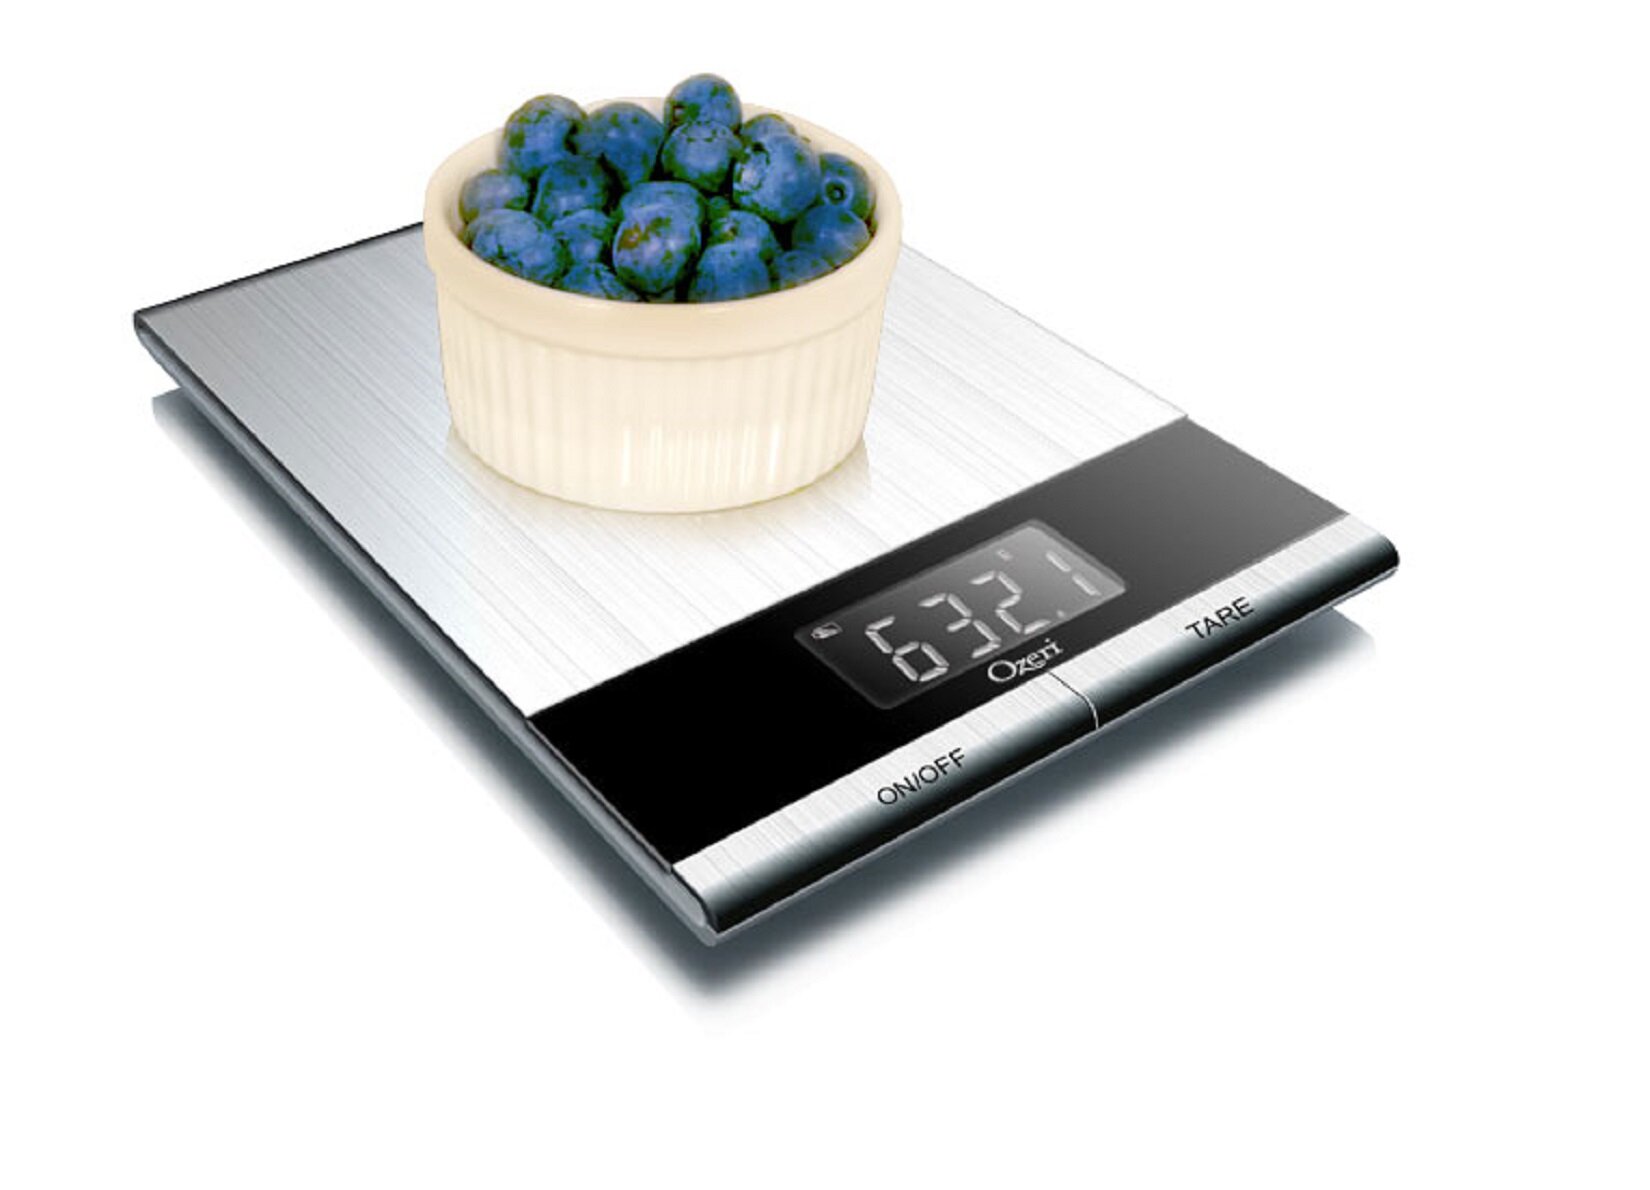 Ozeri Touch III 22 lbs (10 kg) Digital Kitchen Scale with Calorie Counter, in Tempered Glass